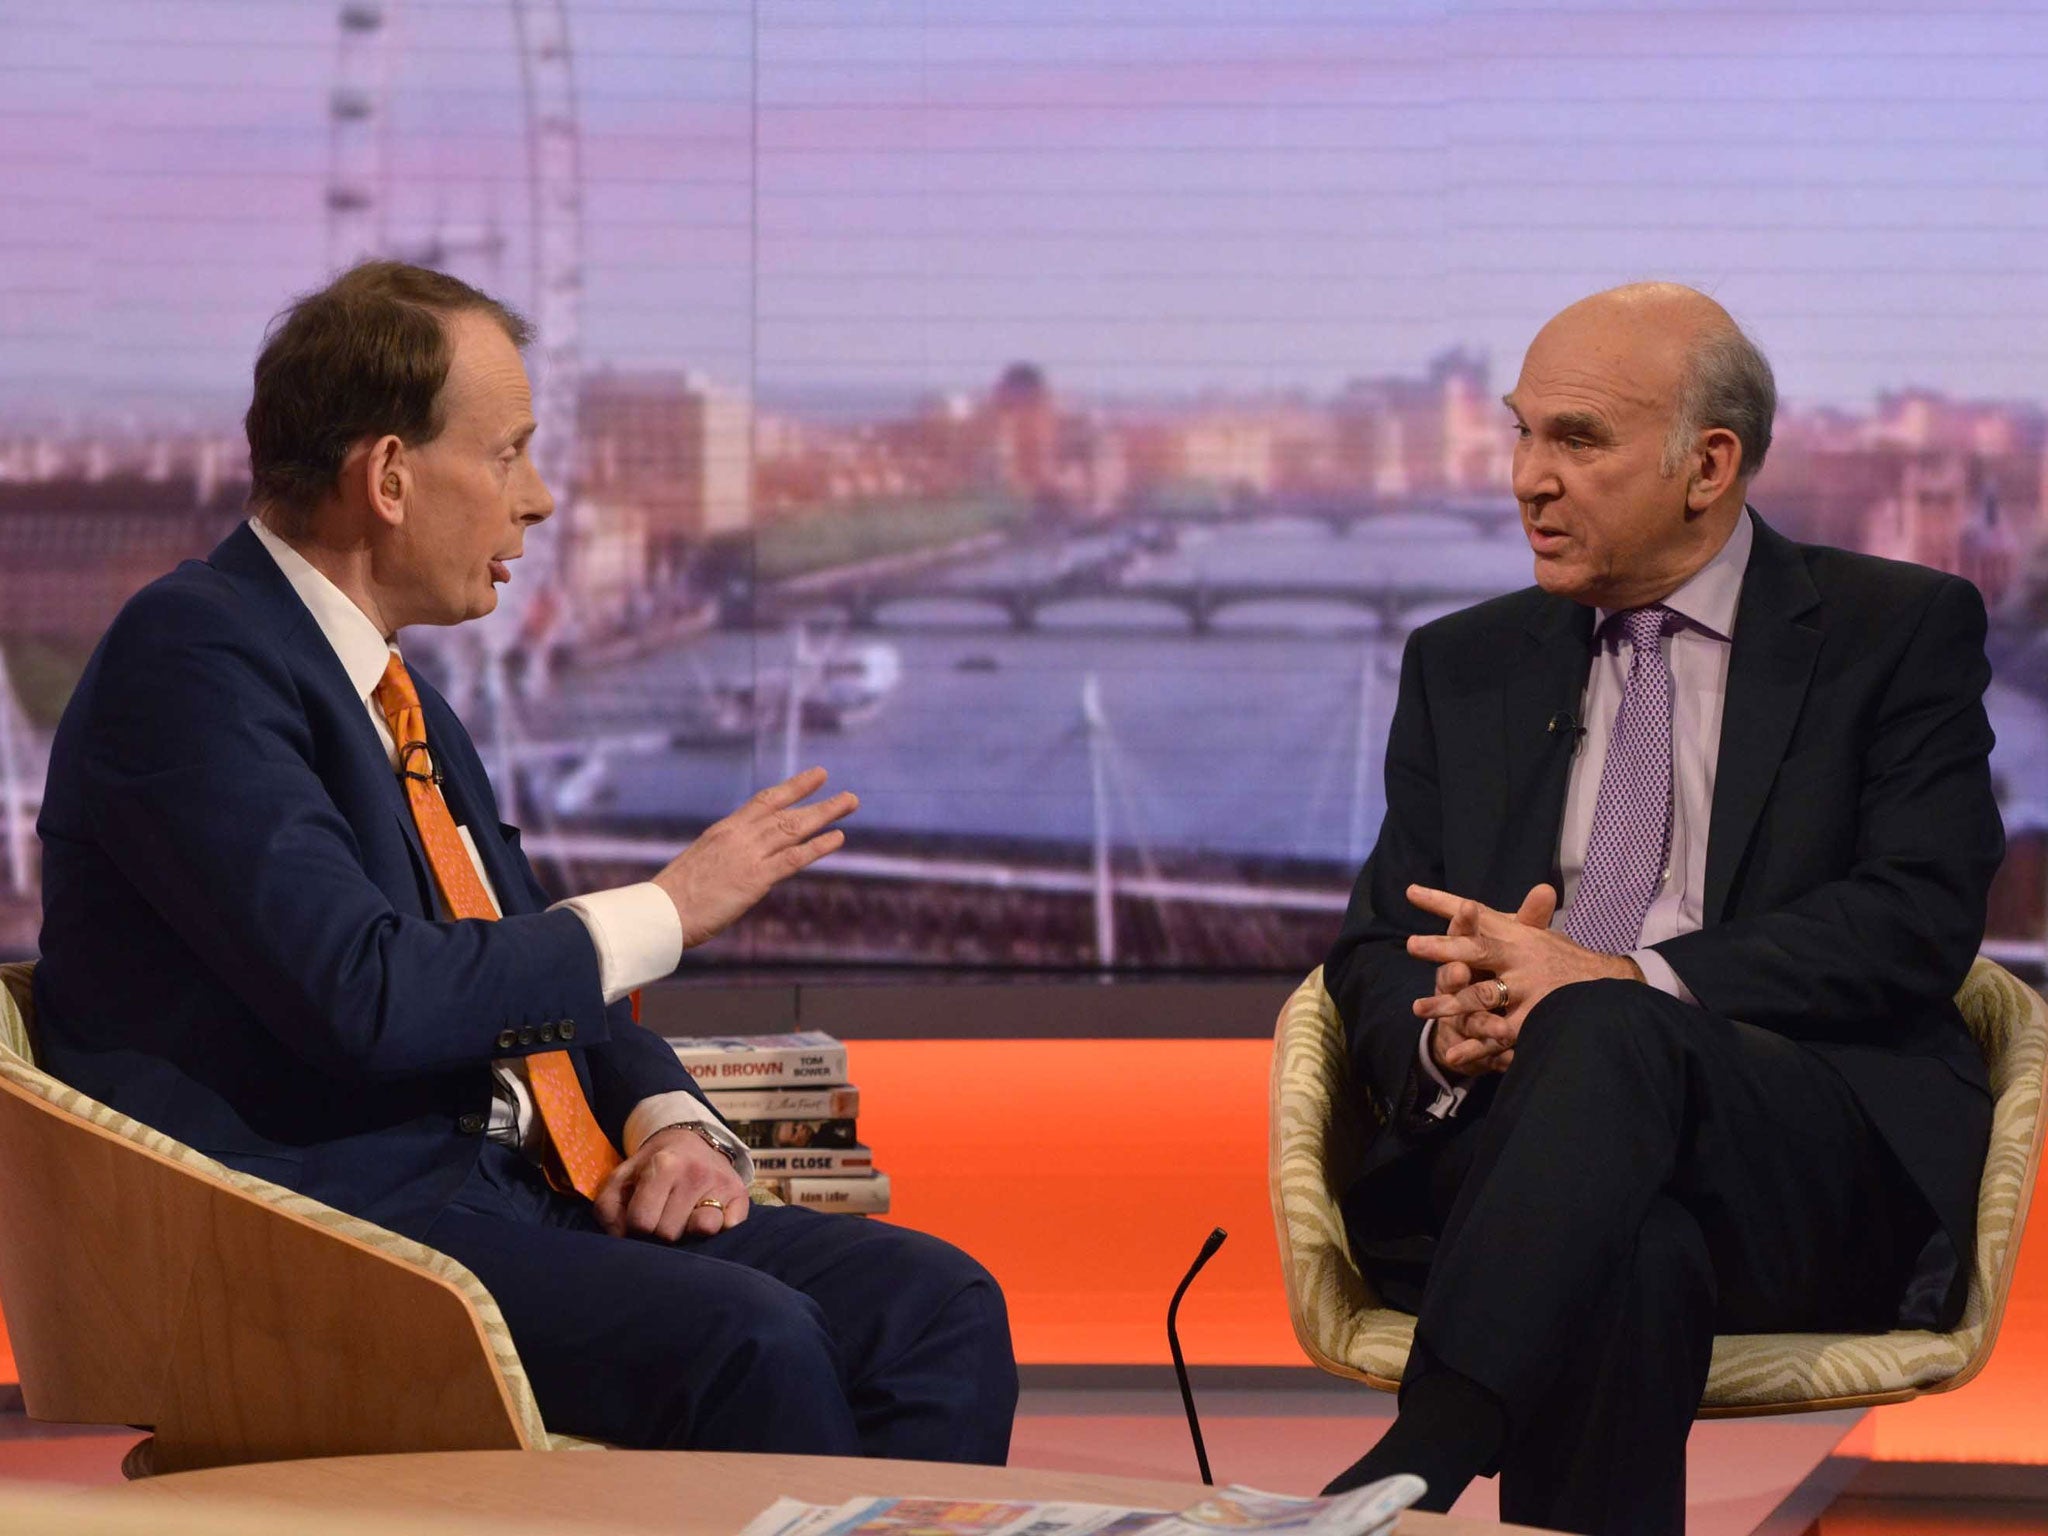 Andrew Marr (left) and Vince Cable appearing on BBC1's The Andrew Marr Show - the Business Secretary accused the Conservatives of 'panicking' about immigration because the party is under pressure from UKIP